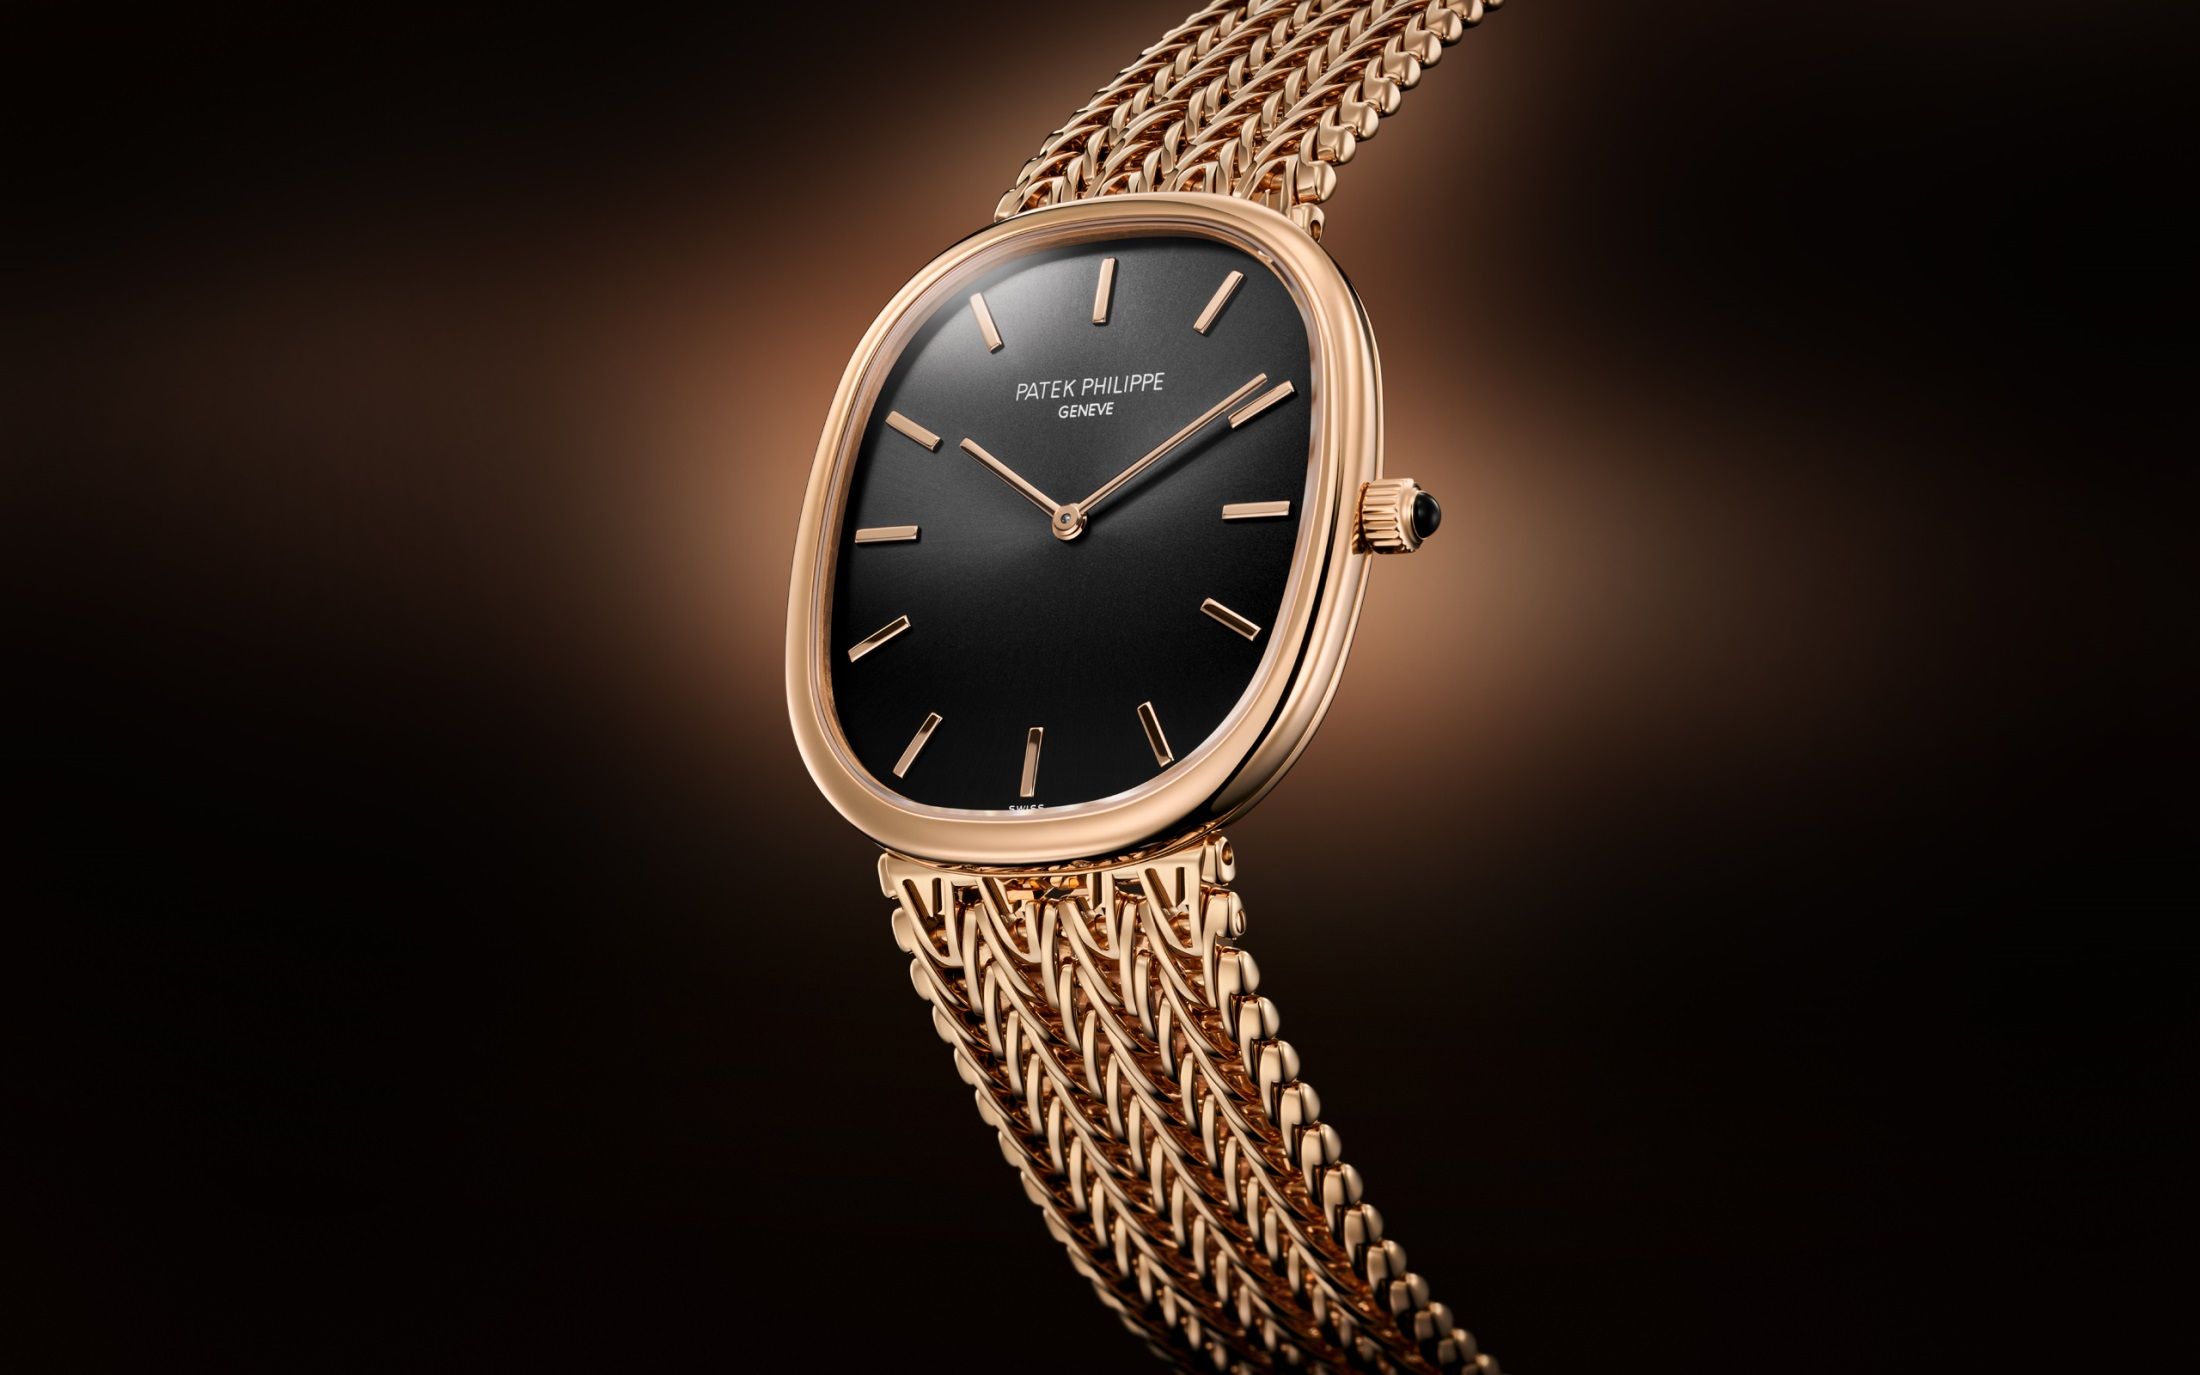 Patek Philippe revives the Golden Ellipse with a chain-style bracelet pairing